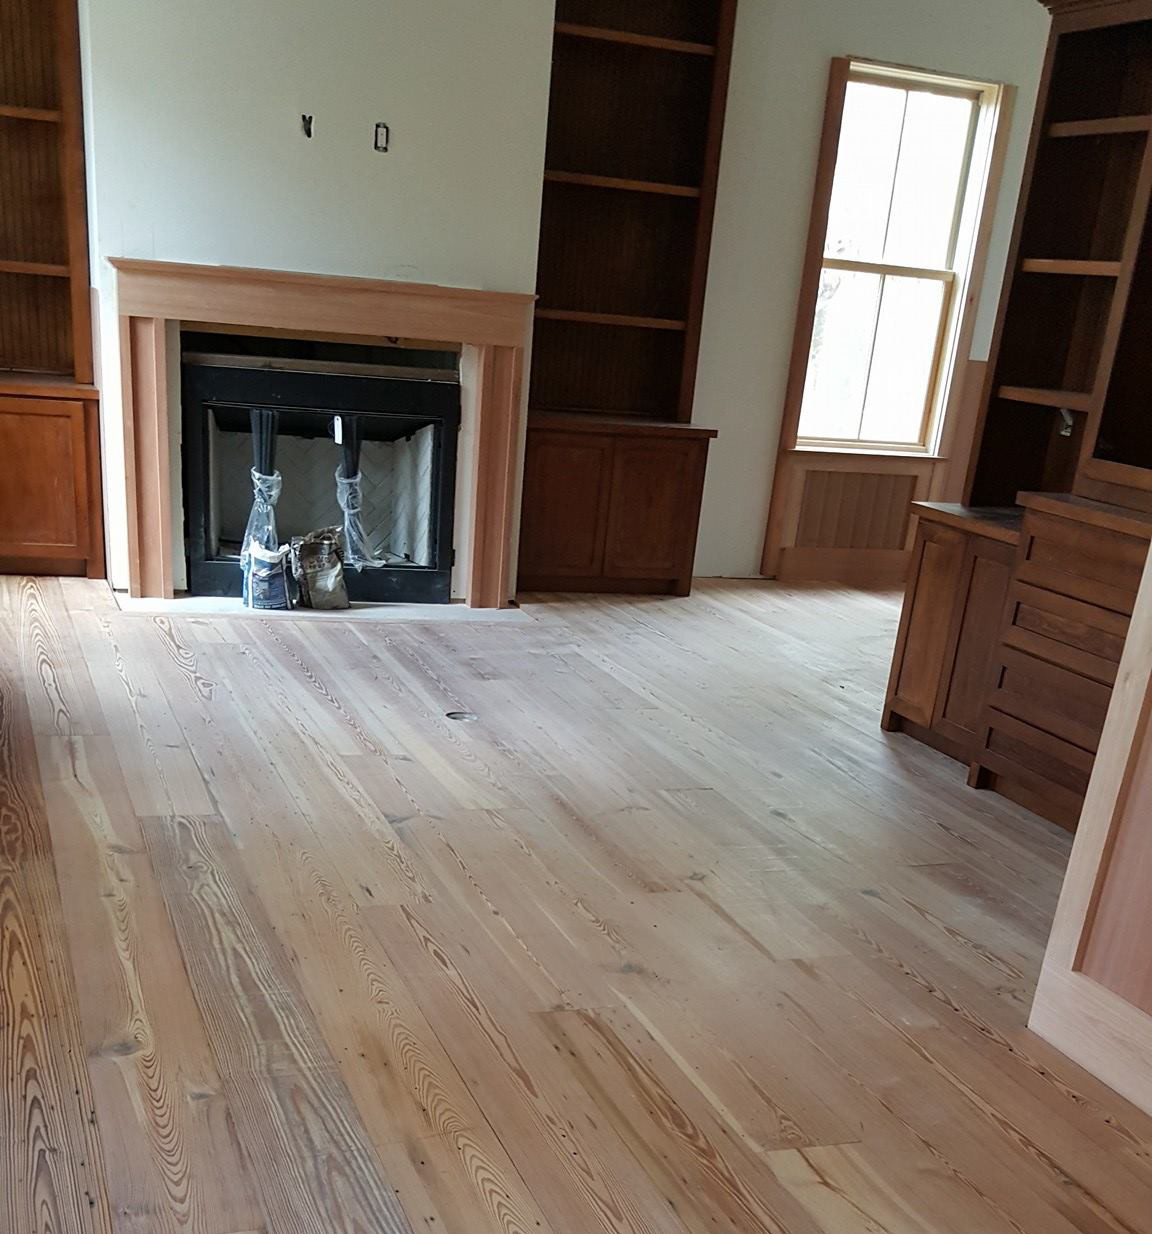 15 Stunning How Do You Install Hardwood Floors On A Concrete Slab 2024 free download how do you install hardwood floors on a concrete slab of olde savannah hardwood flooring inside sand and refinish existing floors